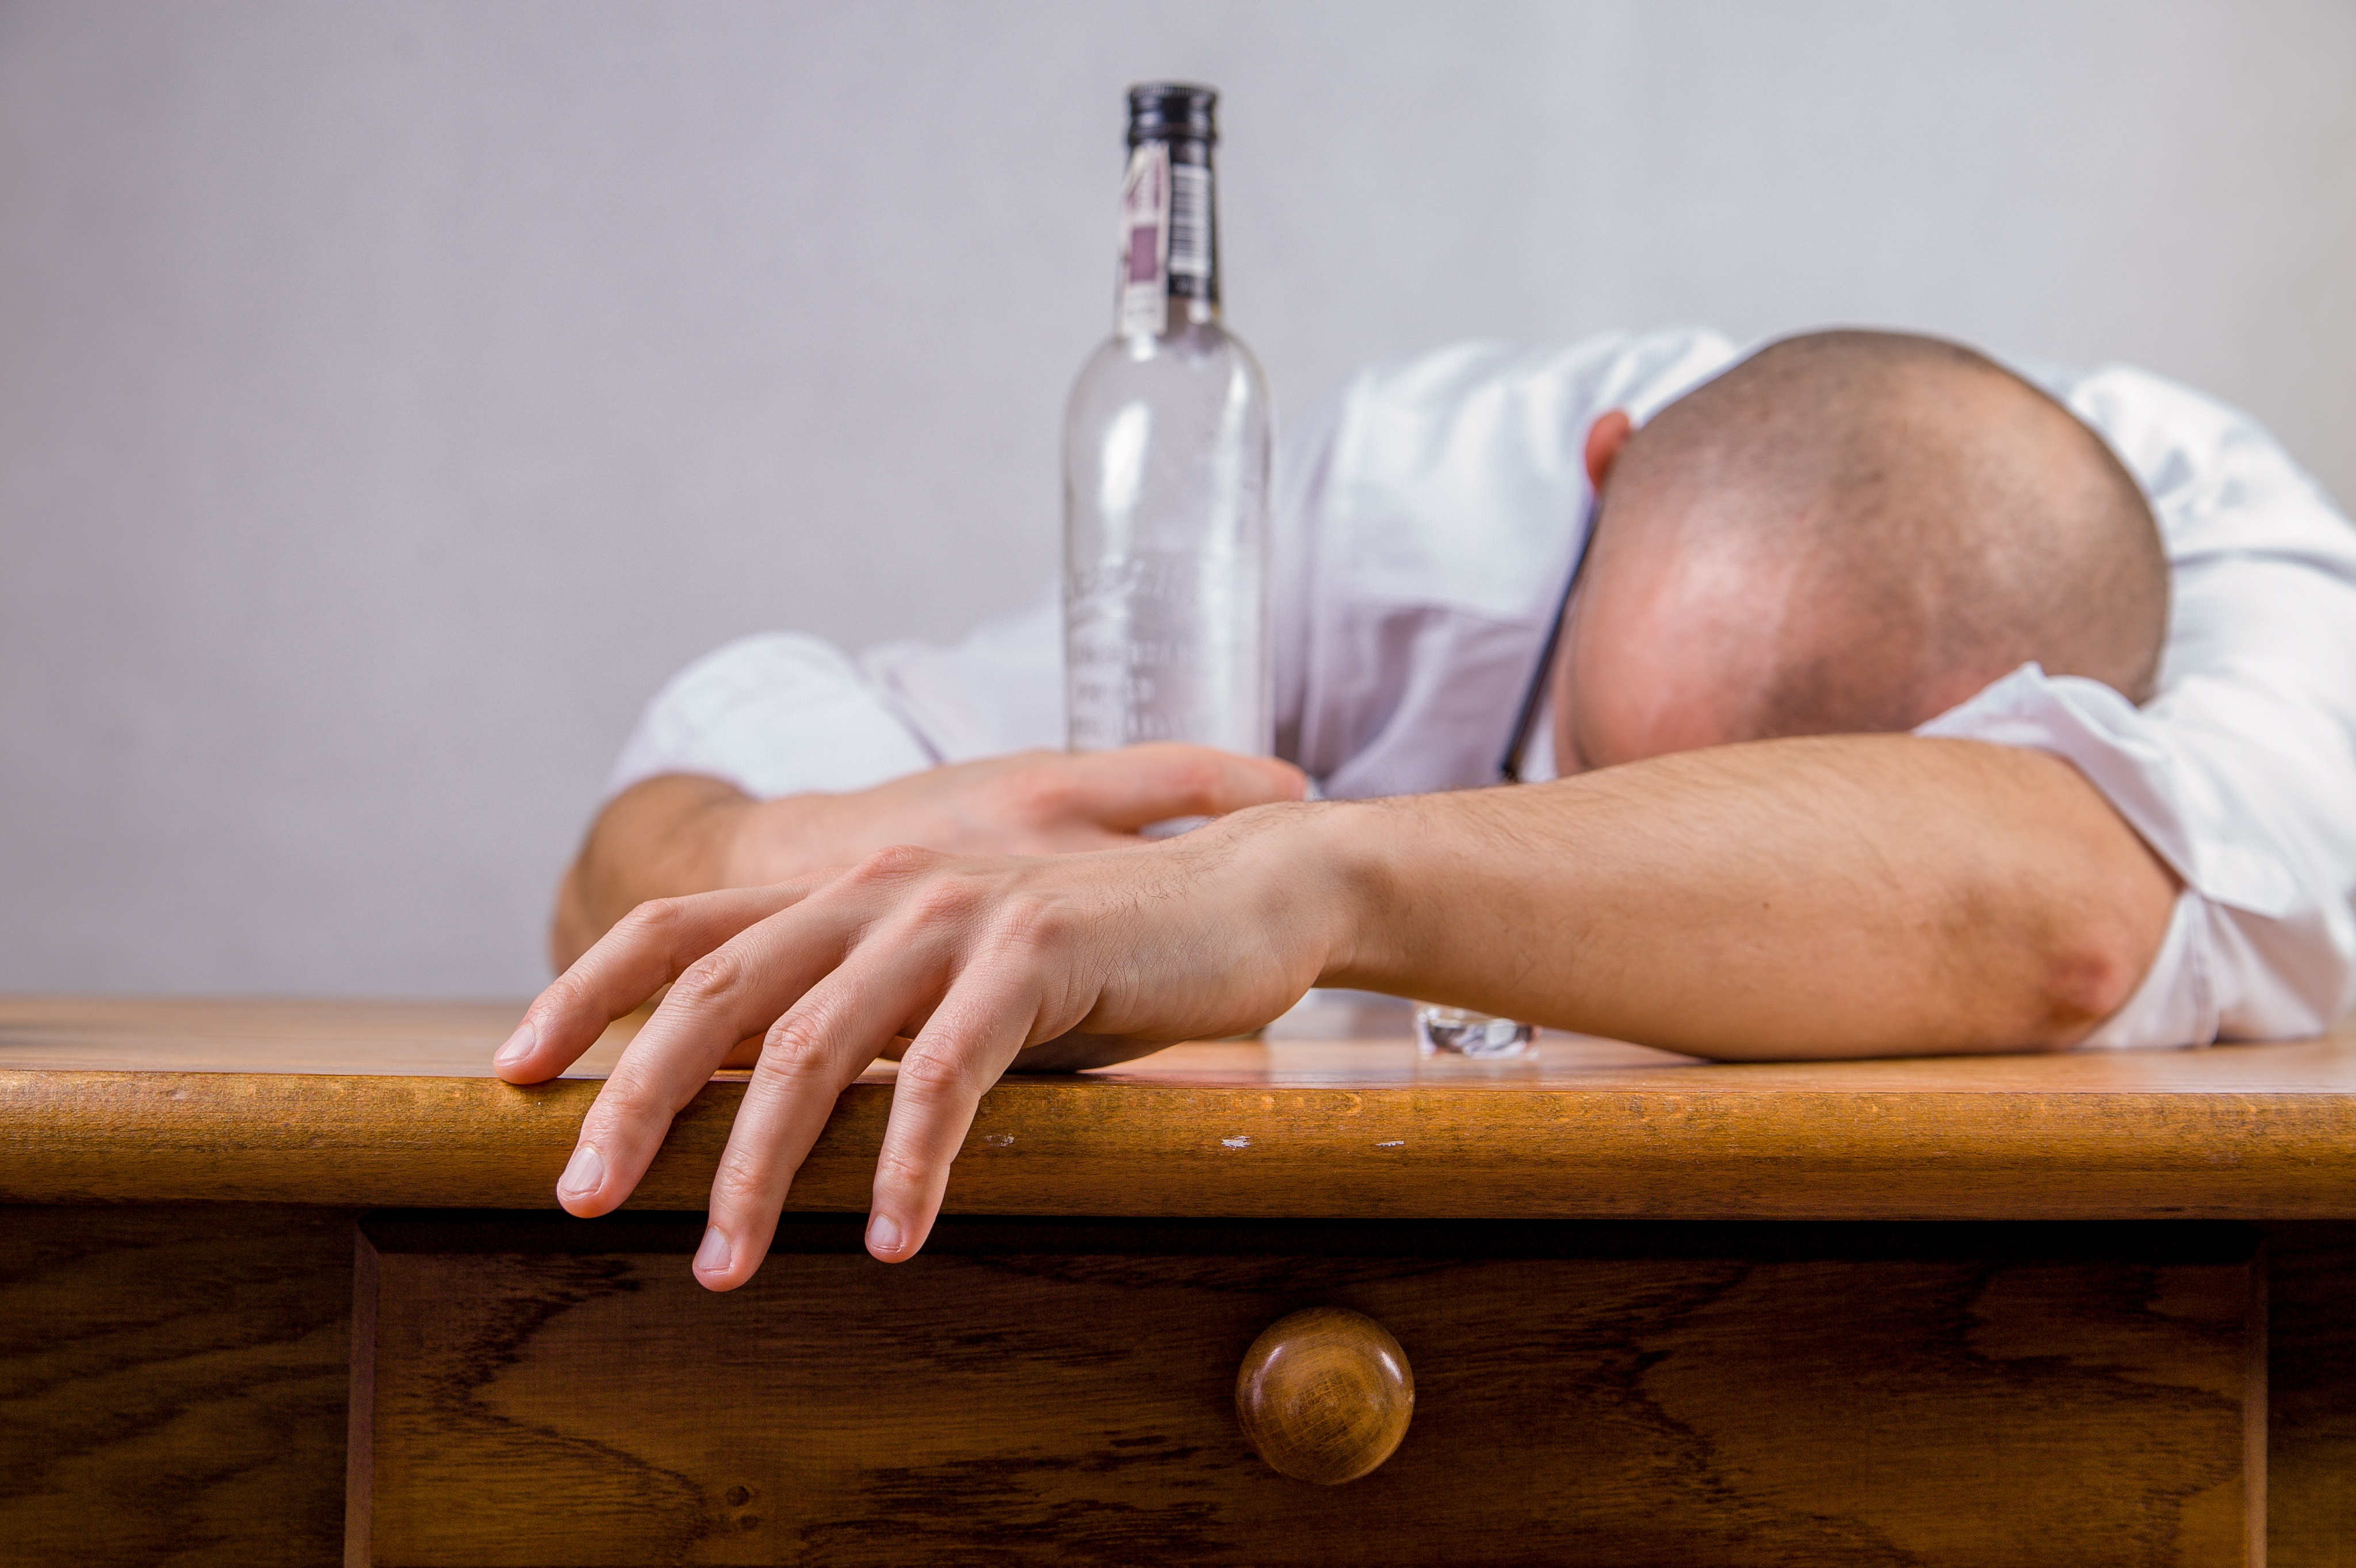 Signs You Have an Alcohol Problem